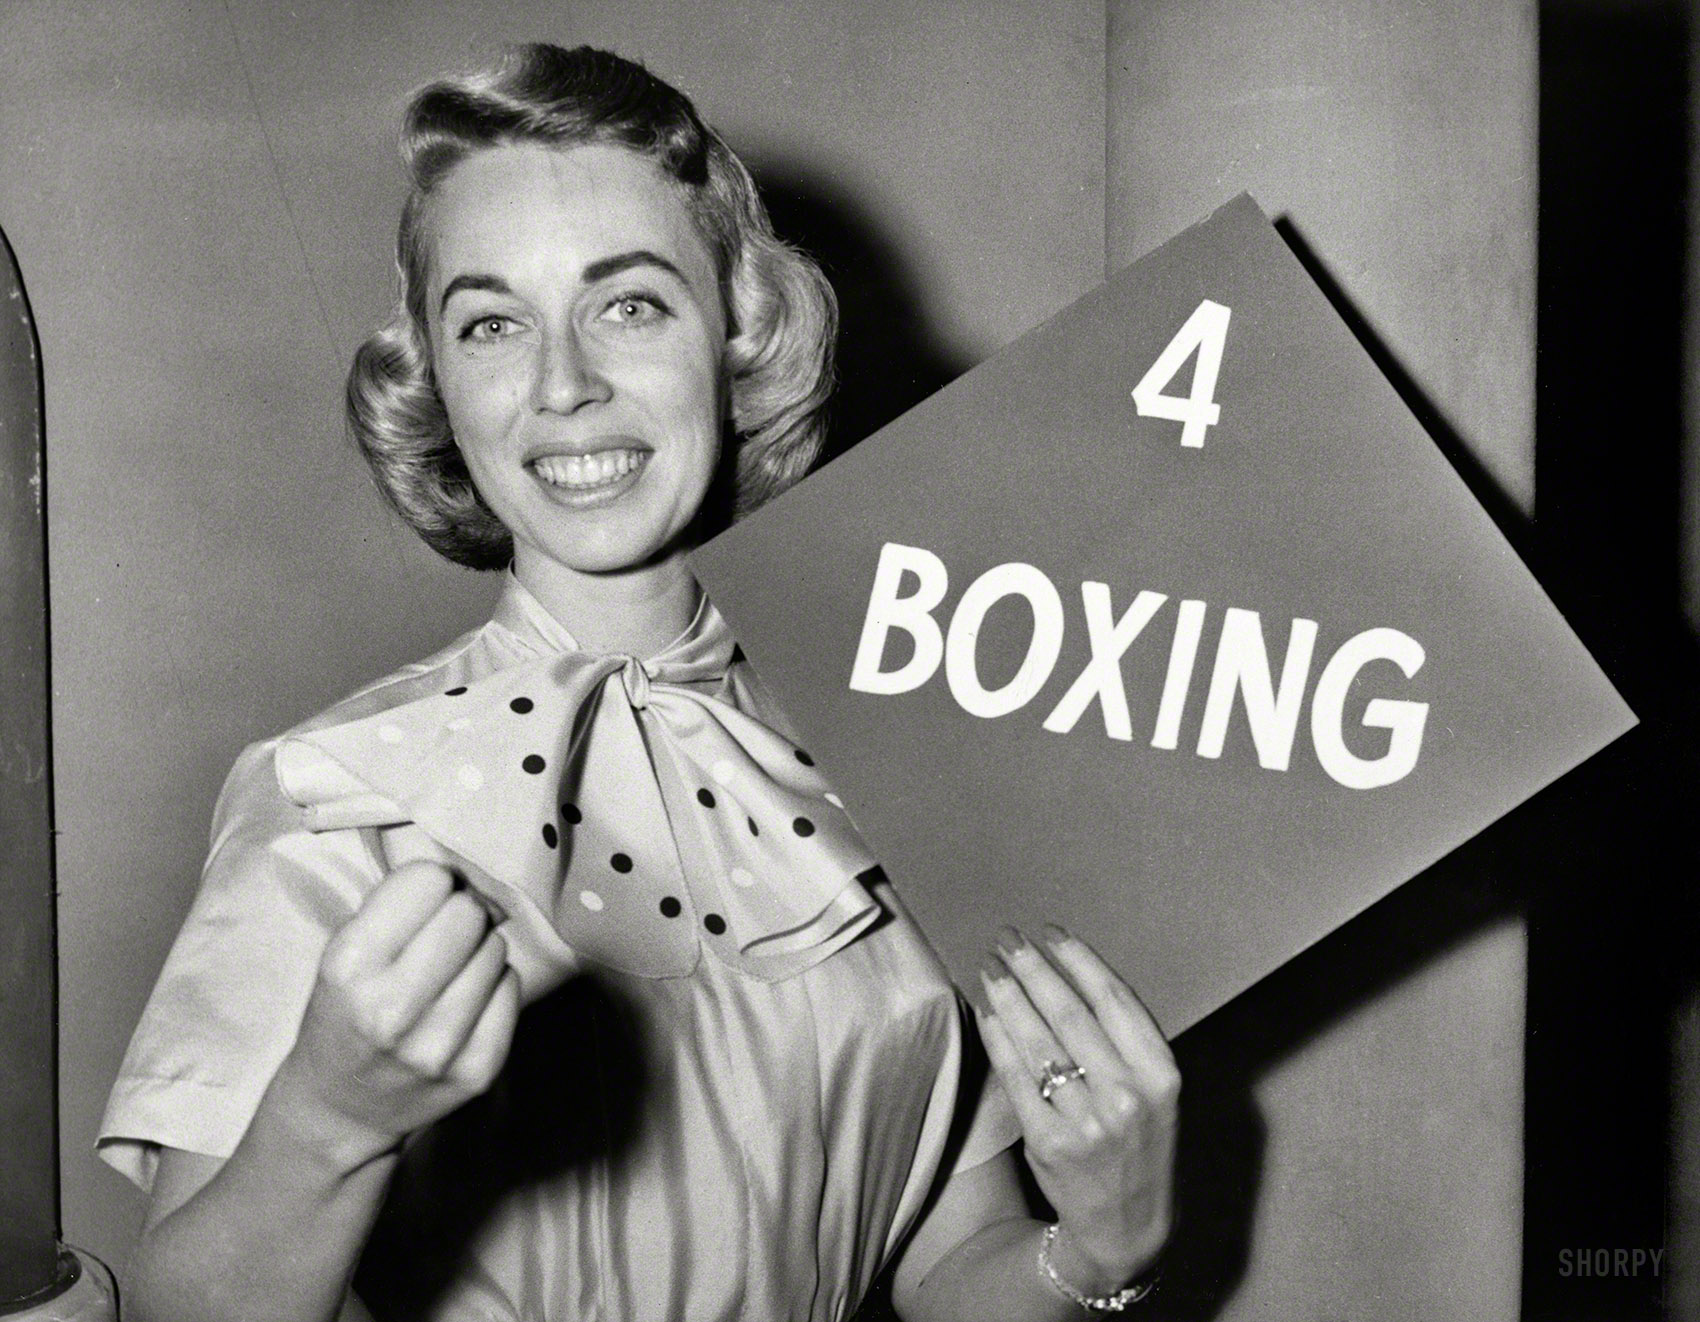 Nov. 15, 1955. "Dr. Joyce Brothers holds up her category, boxing, after winning $8,000 on the CBS television program The $64,000 Question. Dr. Brothers will return next week to decide whether to keep the $8,000 or risk it against $16,000." New York World-Telegram and Sun Photo Collection. View full size.